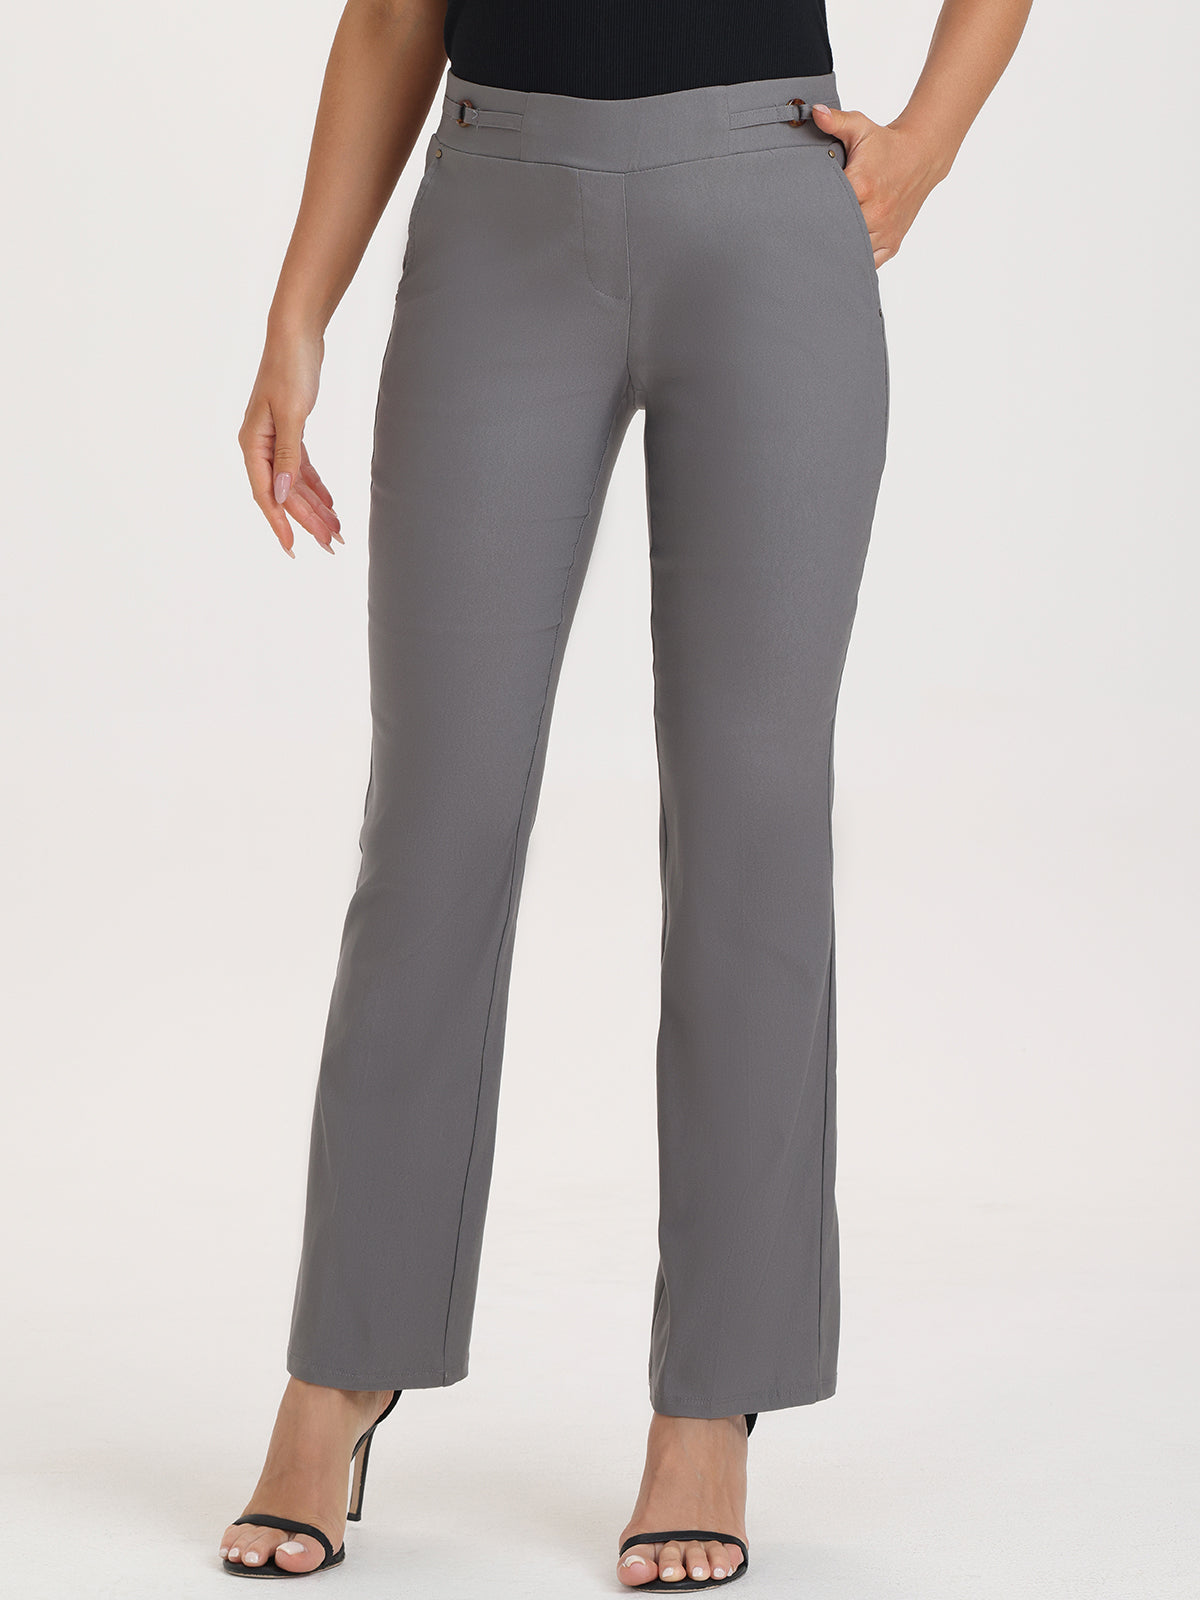  Womens Pull On Barely Bootcut Stretch Dress Pants